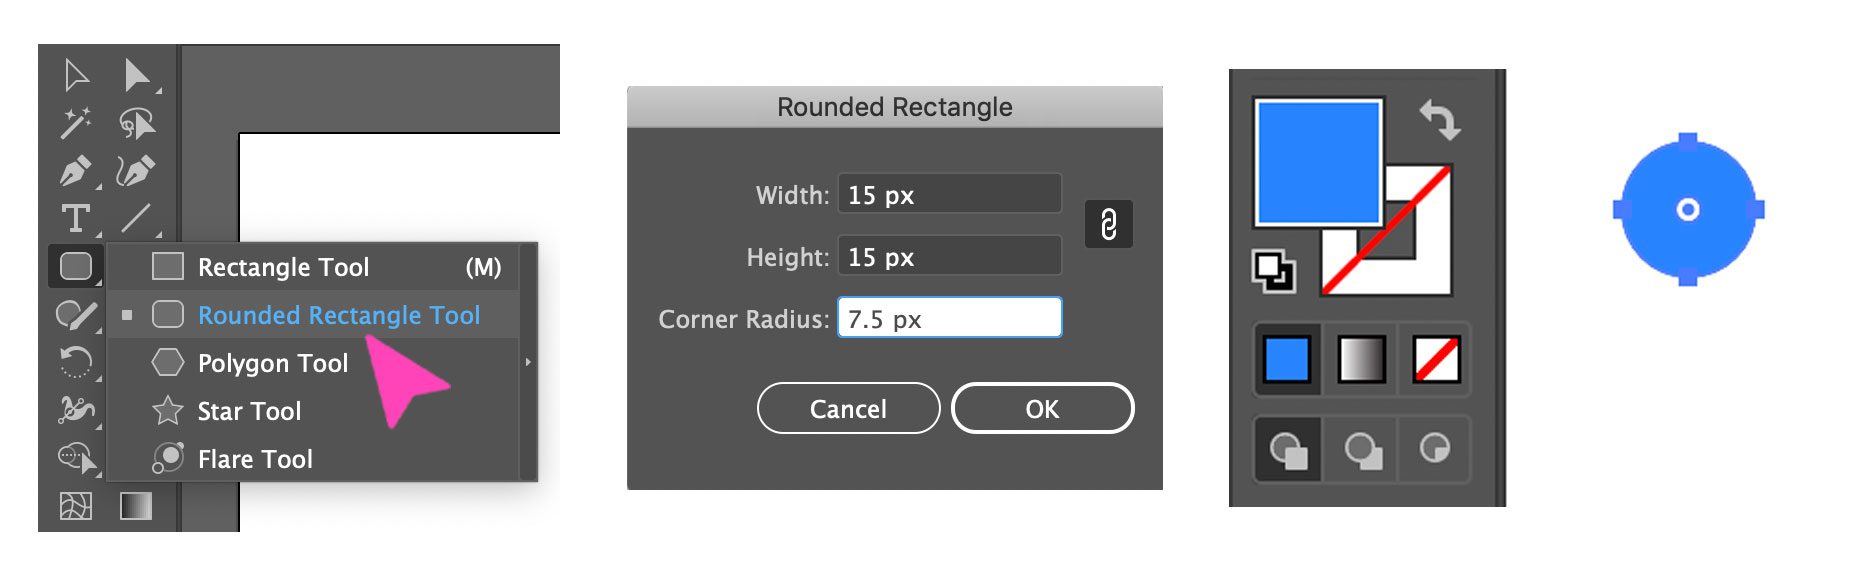 screenshot of the Rounded rectangle tool in PHotoshop